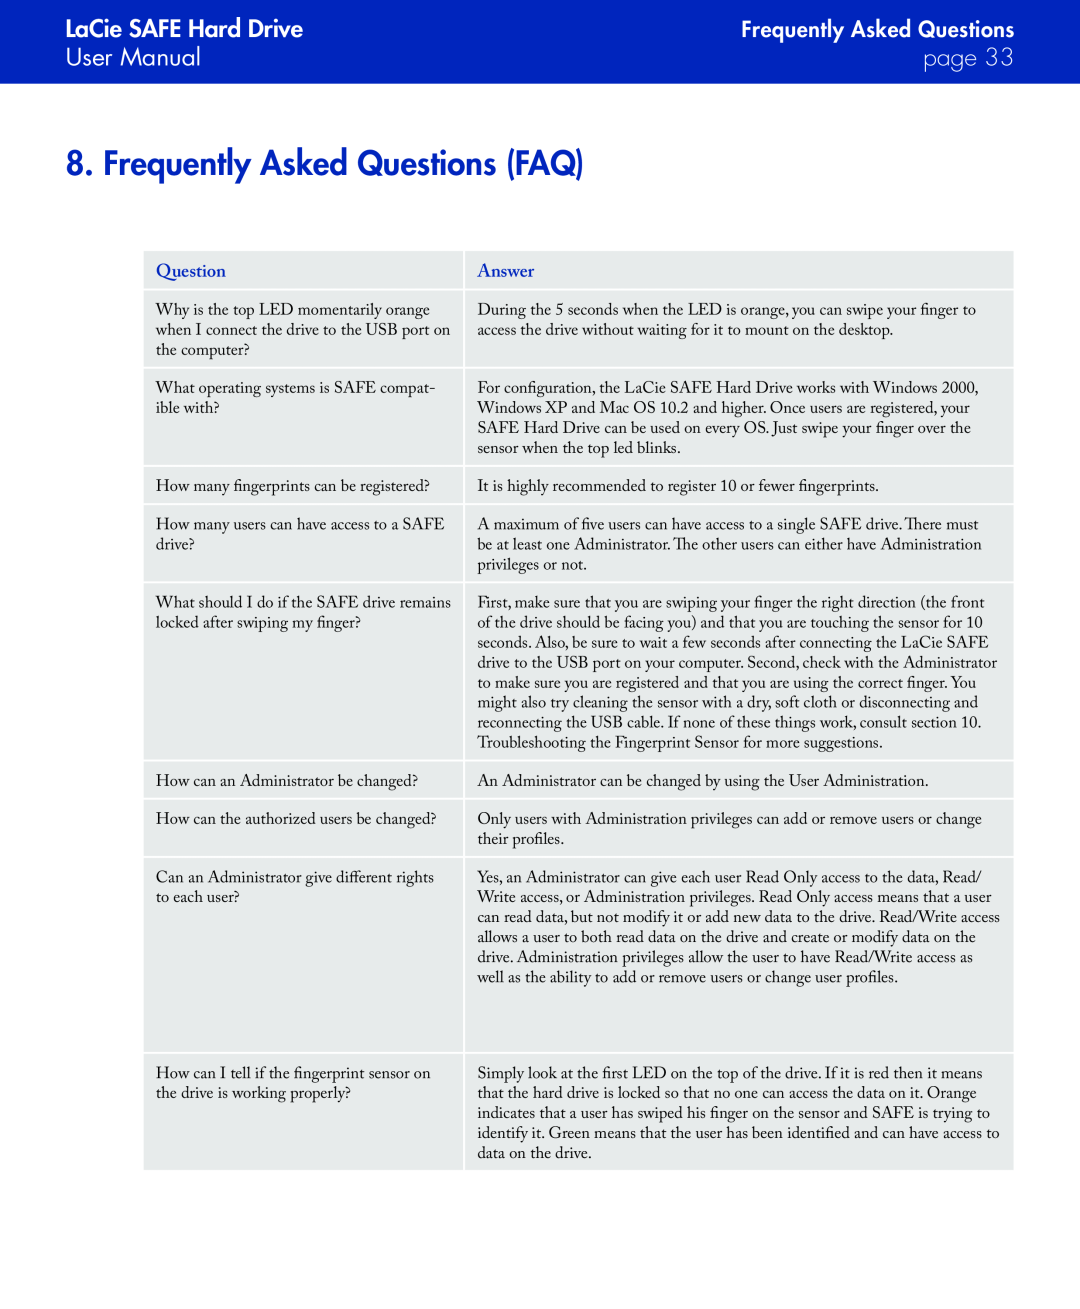 LaCie manual Frequently Asked Questions FAQ, LaCie SAFE Hard Drive, User Manual, page 